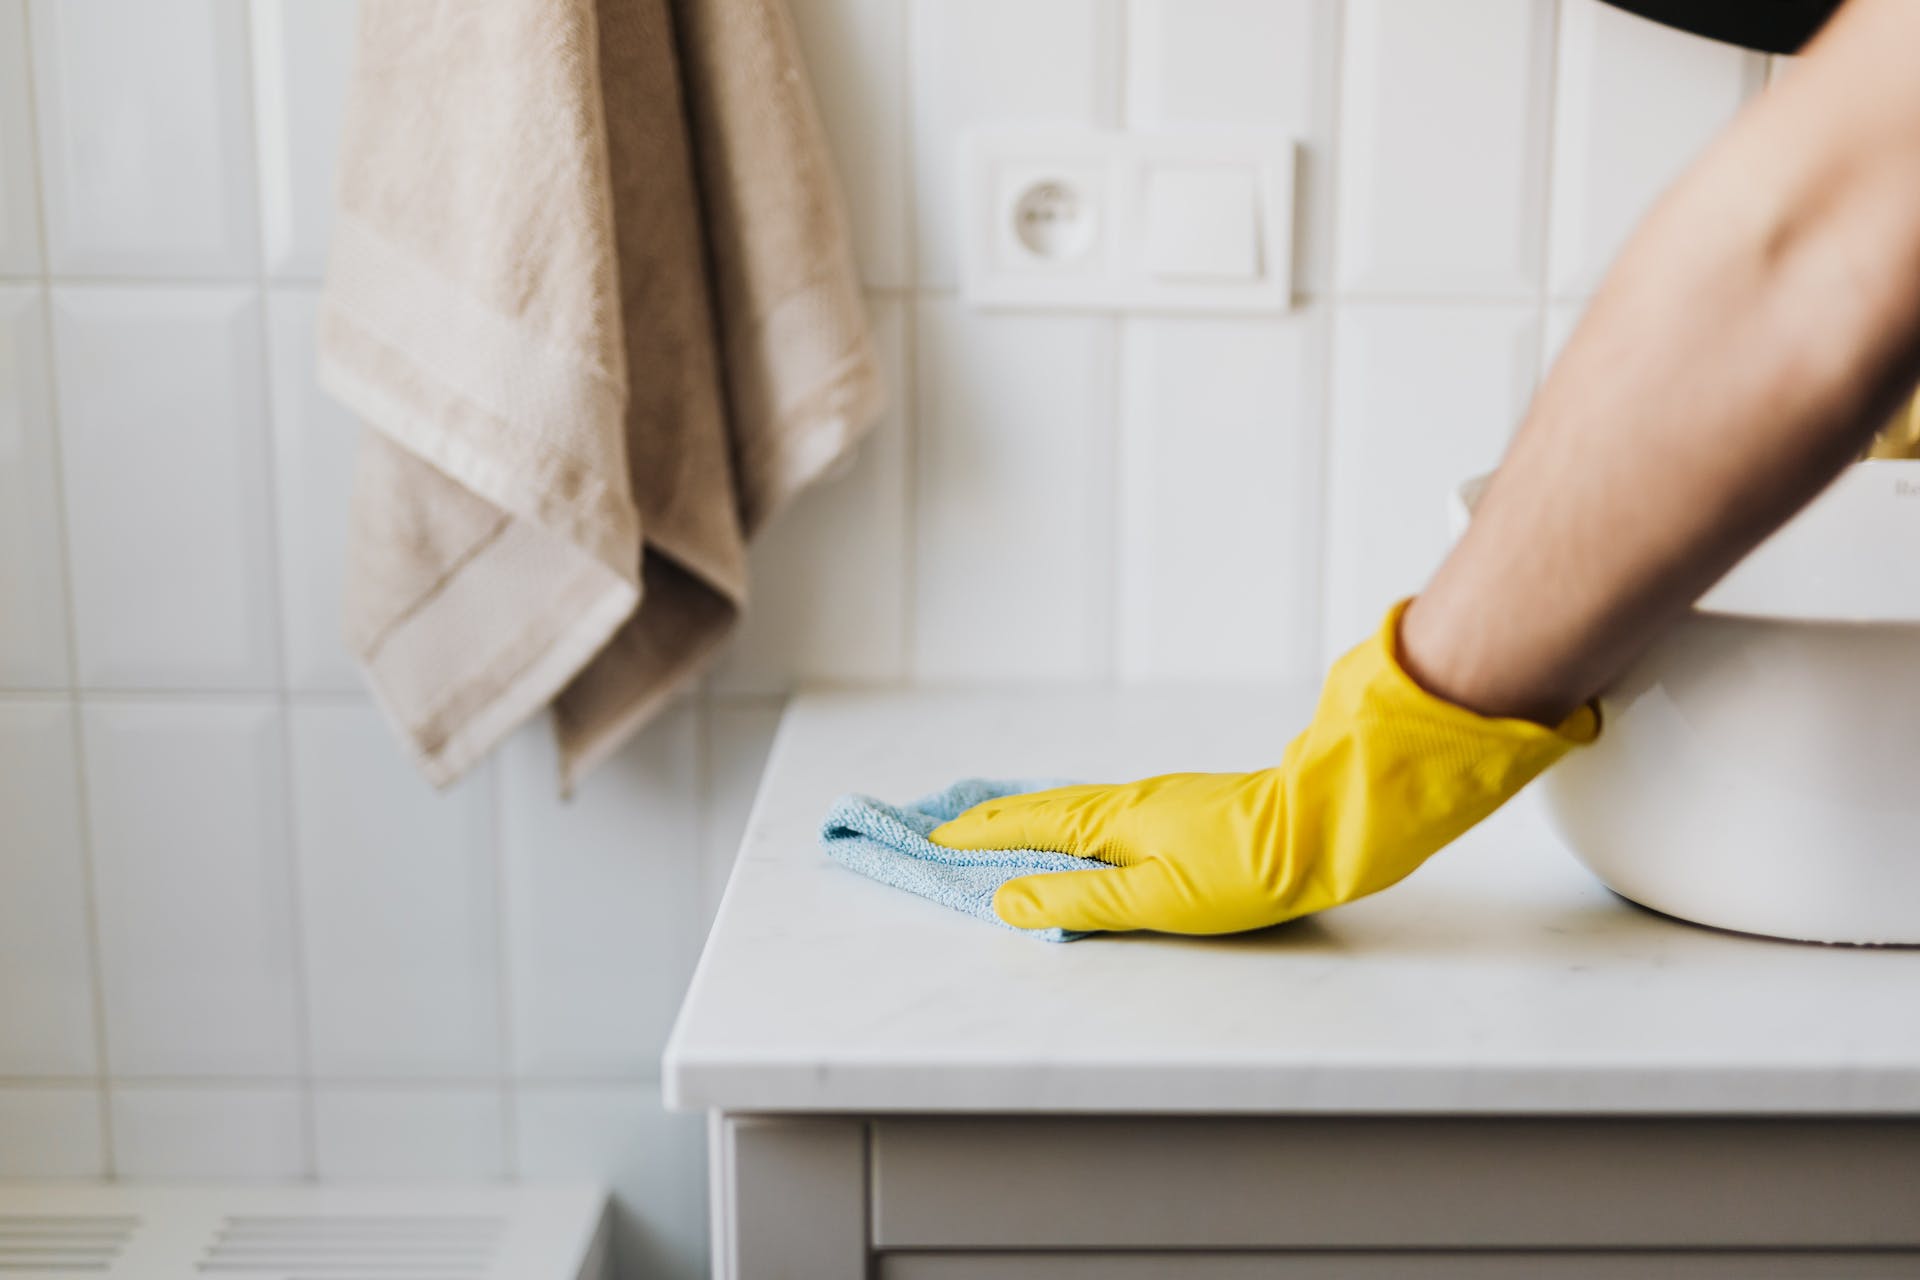 Person cleaning bathroom | Source: Pexels